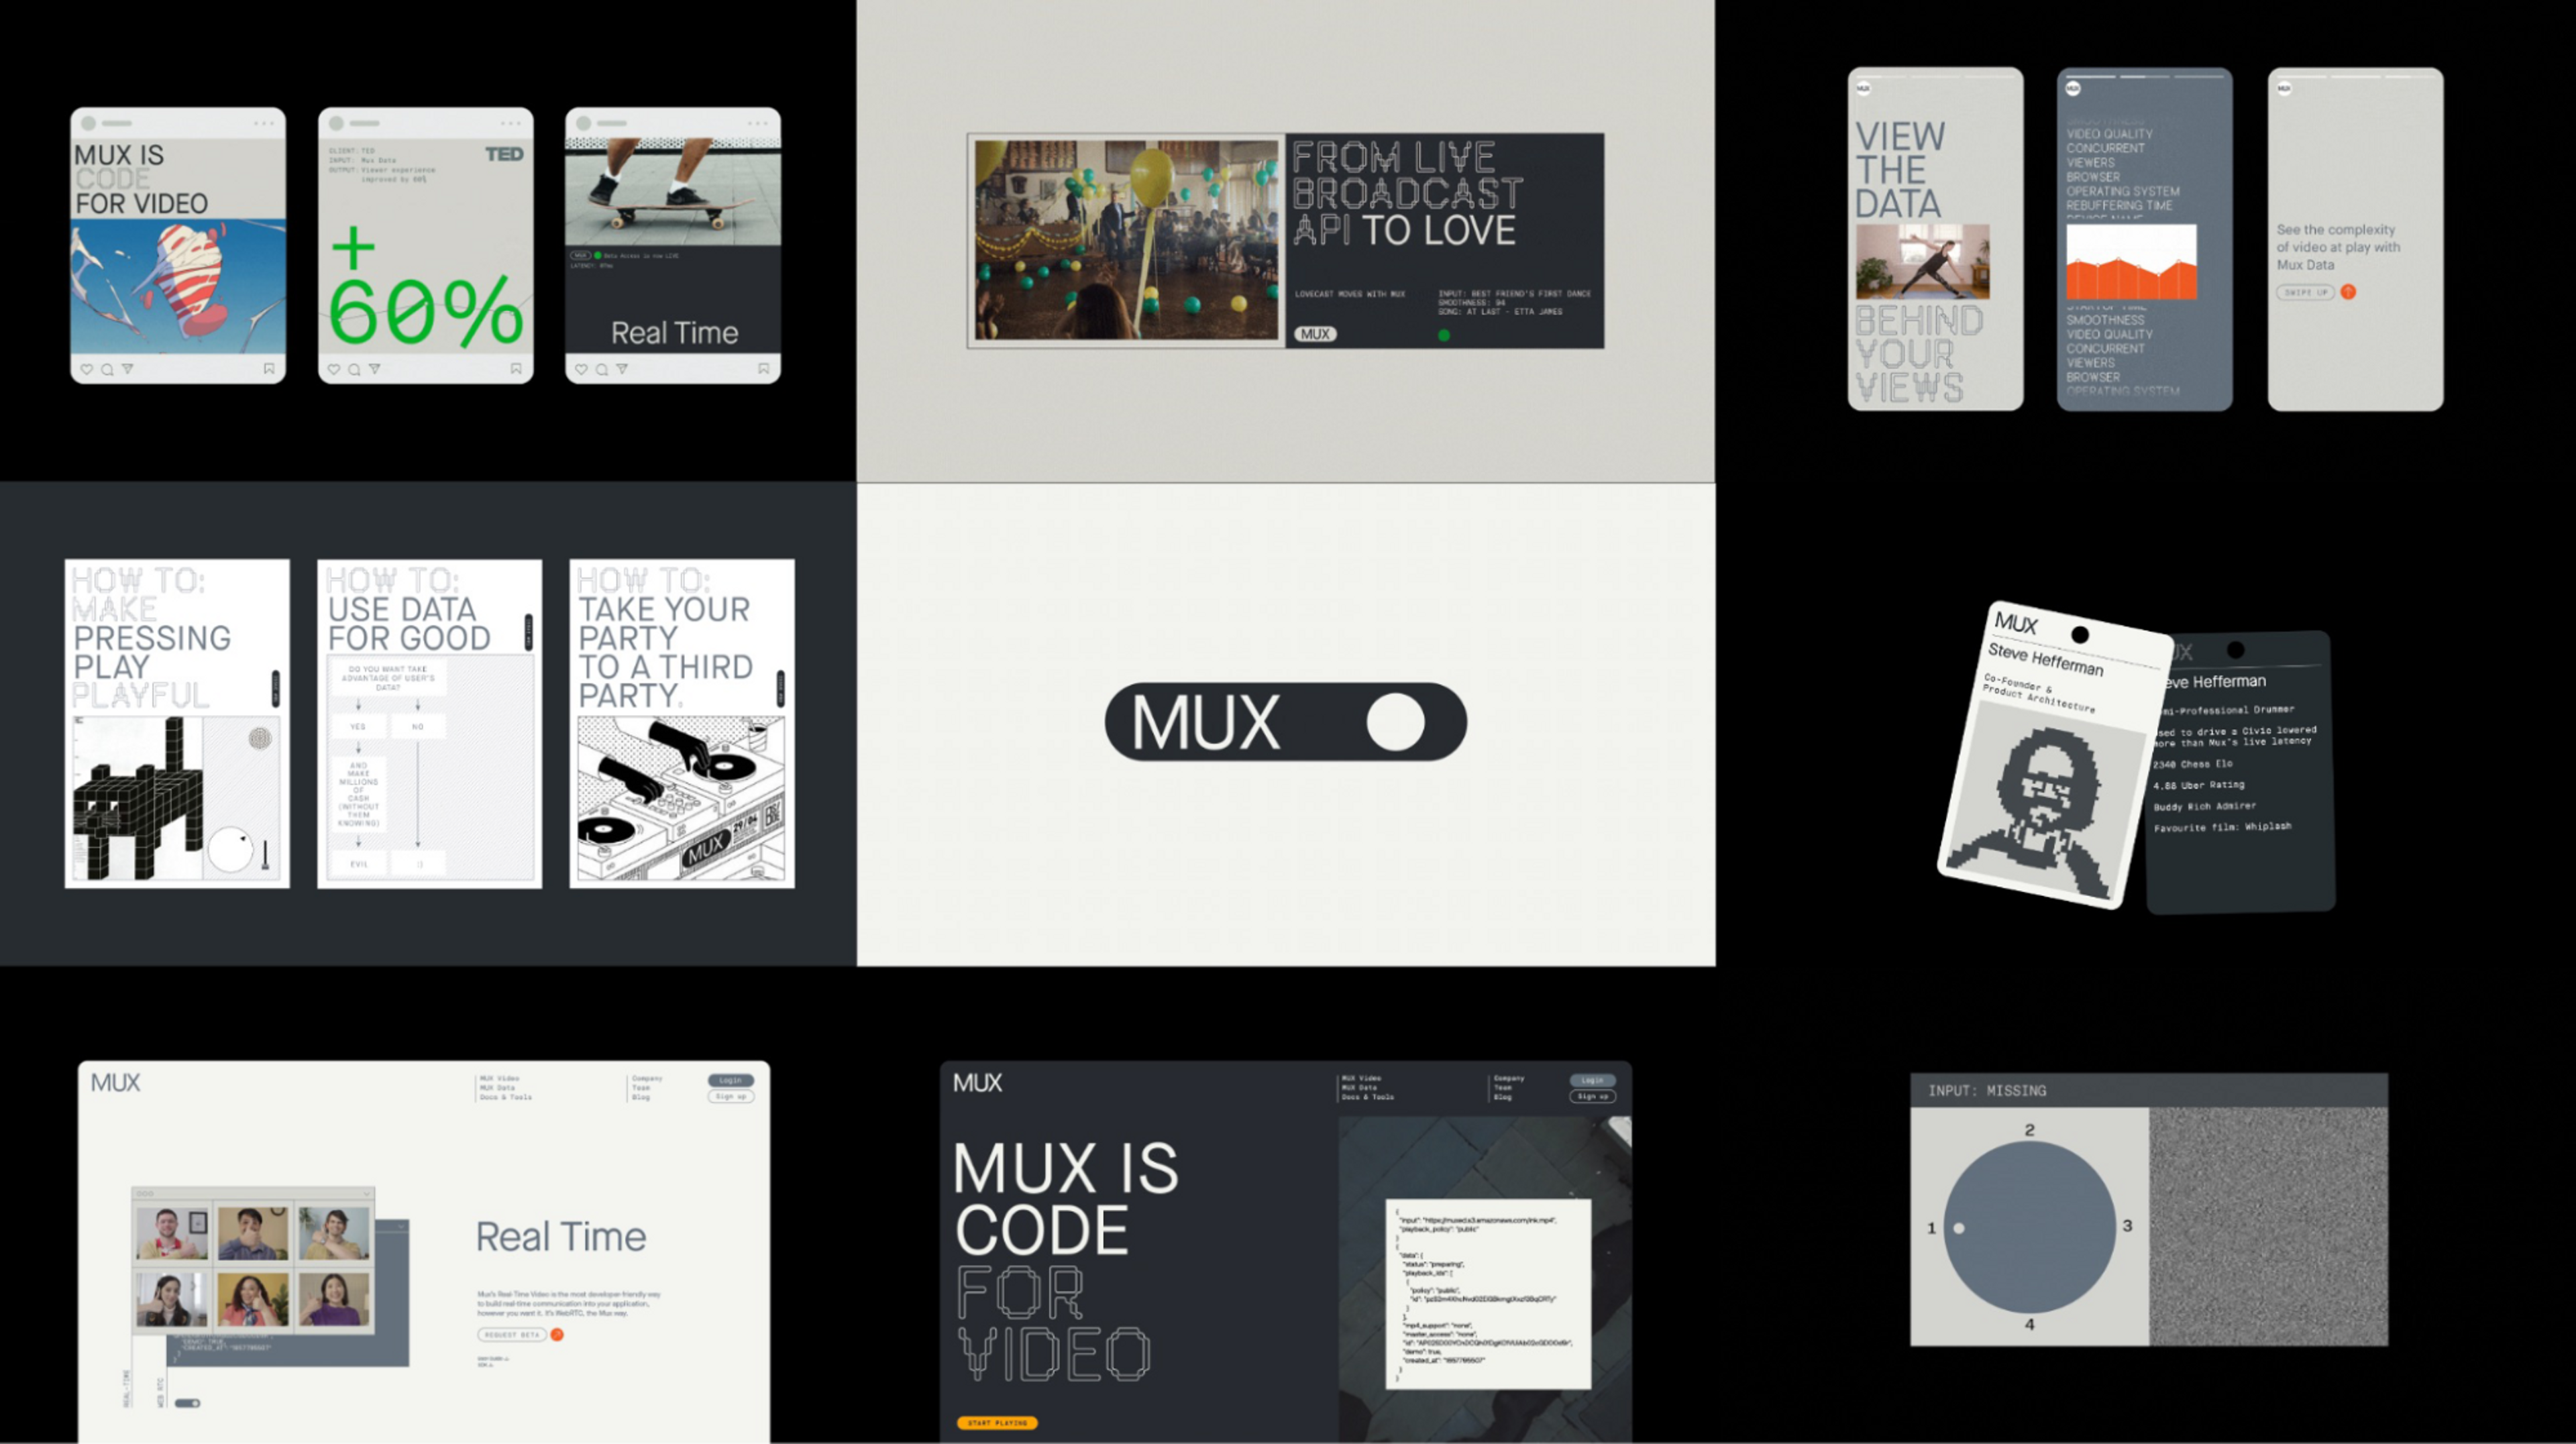 A screenshot of the second branding option delivered to Mux by FTP, a design agency.